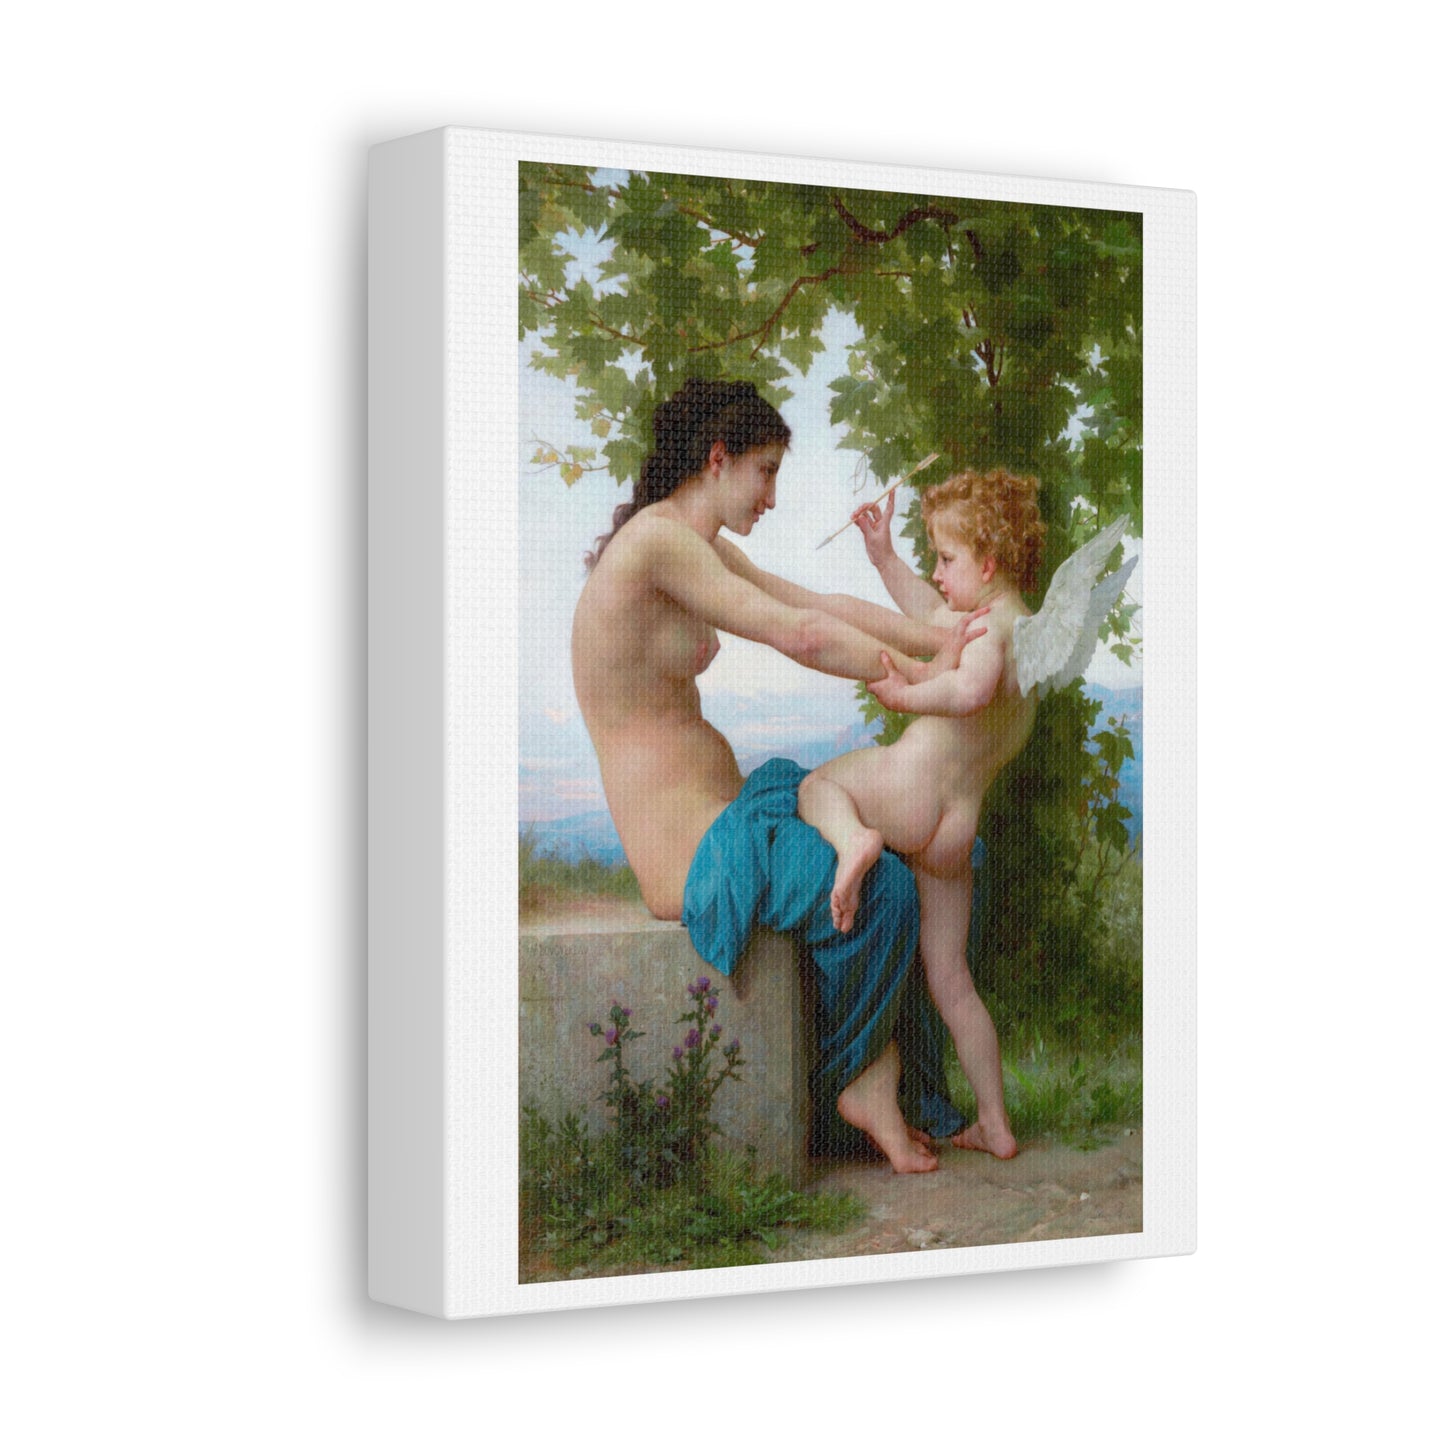 A Young Girl Defending Herself against Love (circa 1880) by William-Adolphe Bouguereau, Art Print from the Original on Canvas